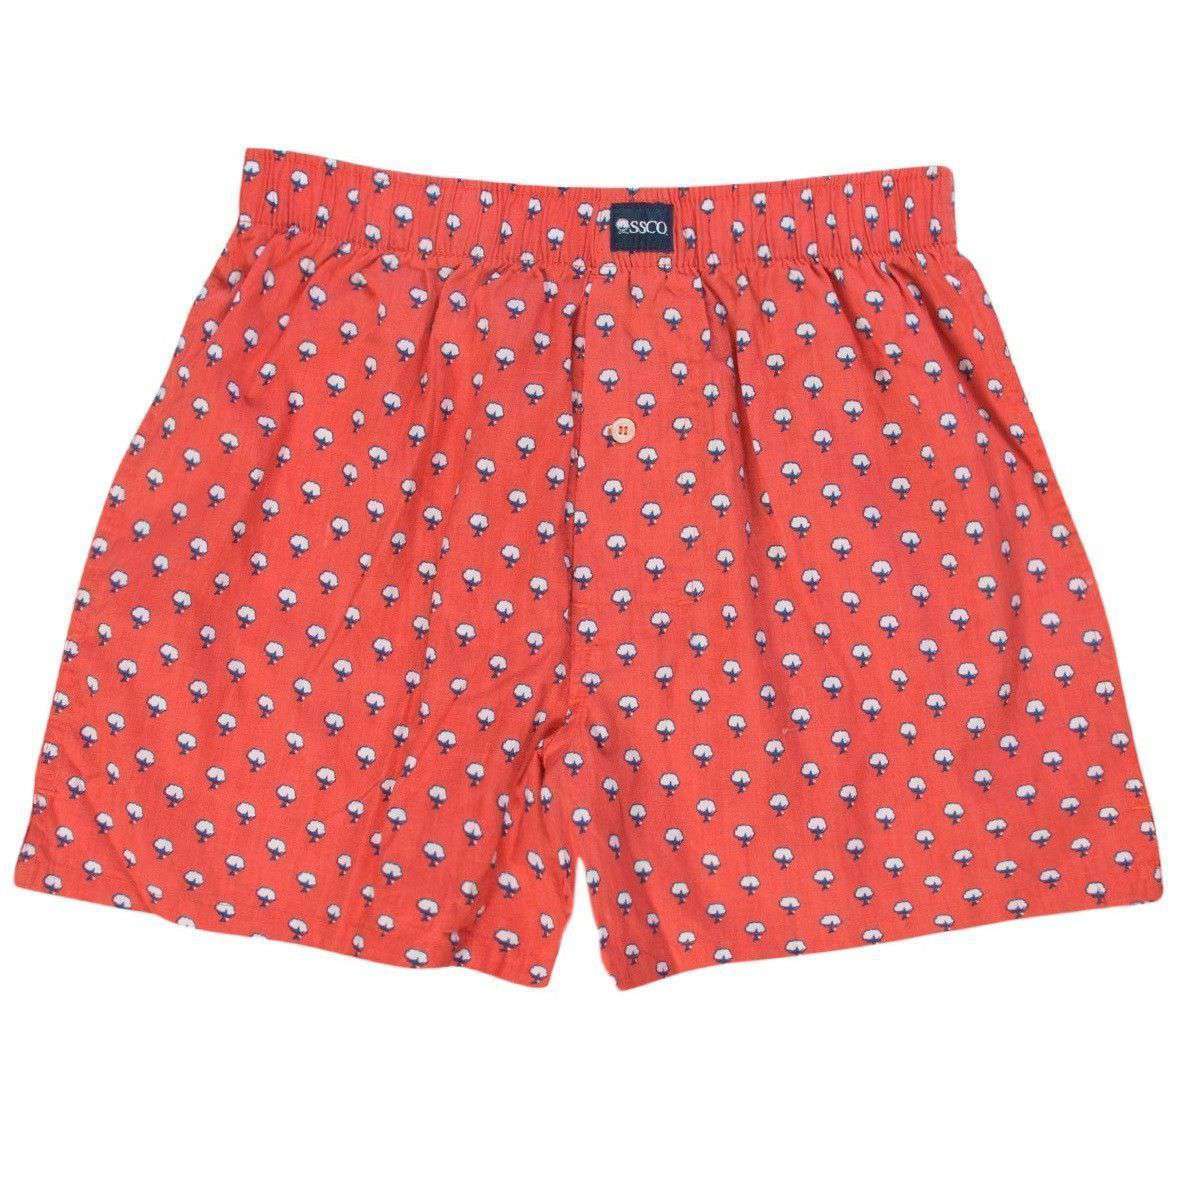 Cotton Club Boxers in Deep Sea Coral by The Southern Shirt Co. - Country Club Prep